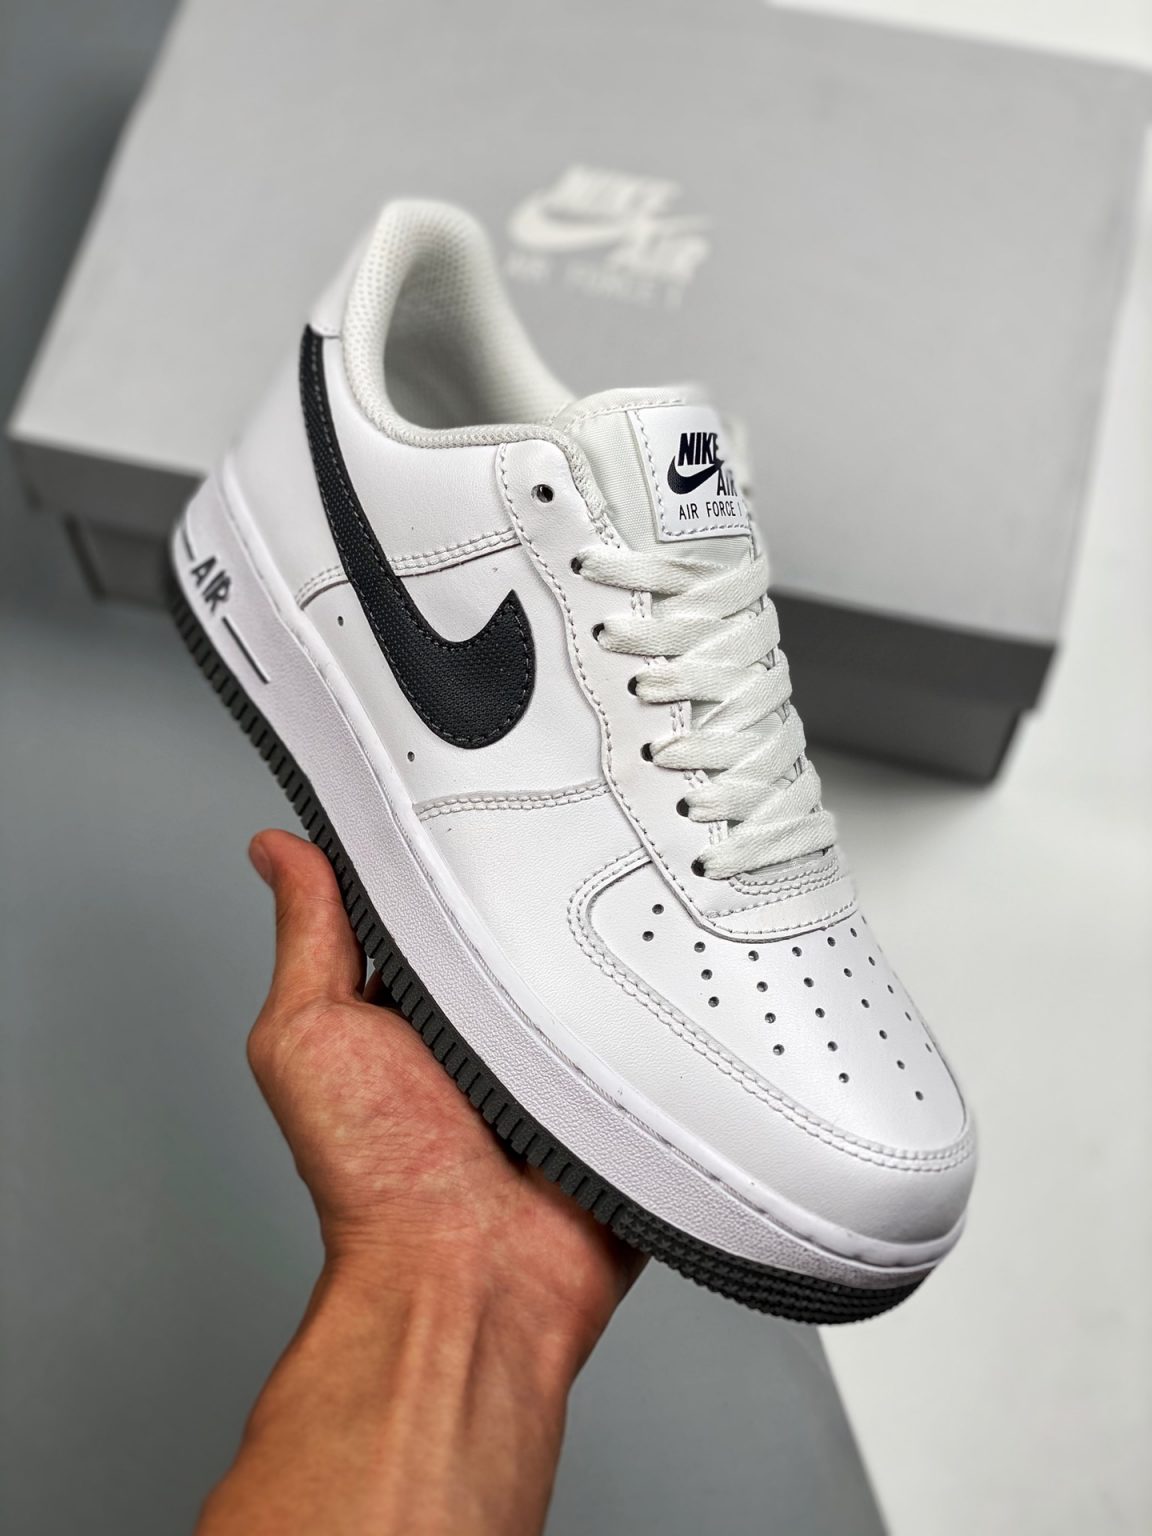 Nike Air Force 1 Low White/Obsidian-Iron Grey For Sale – Sneaker Hello